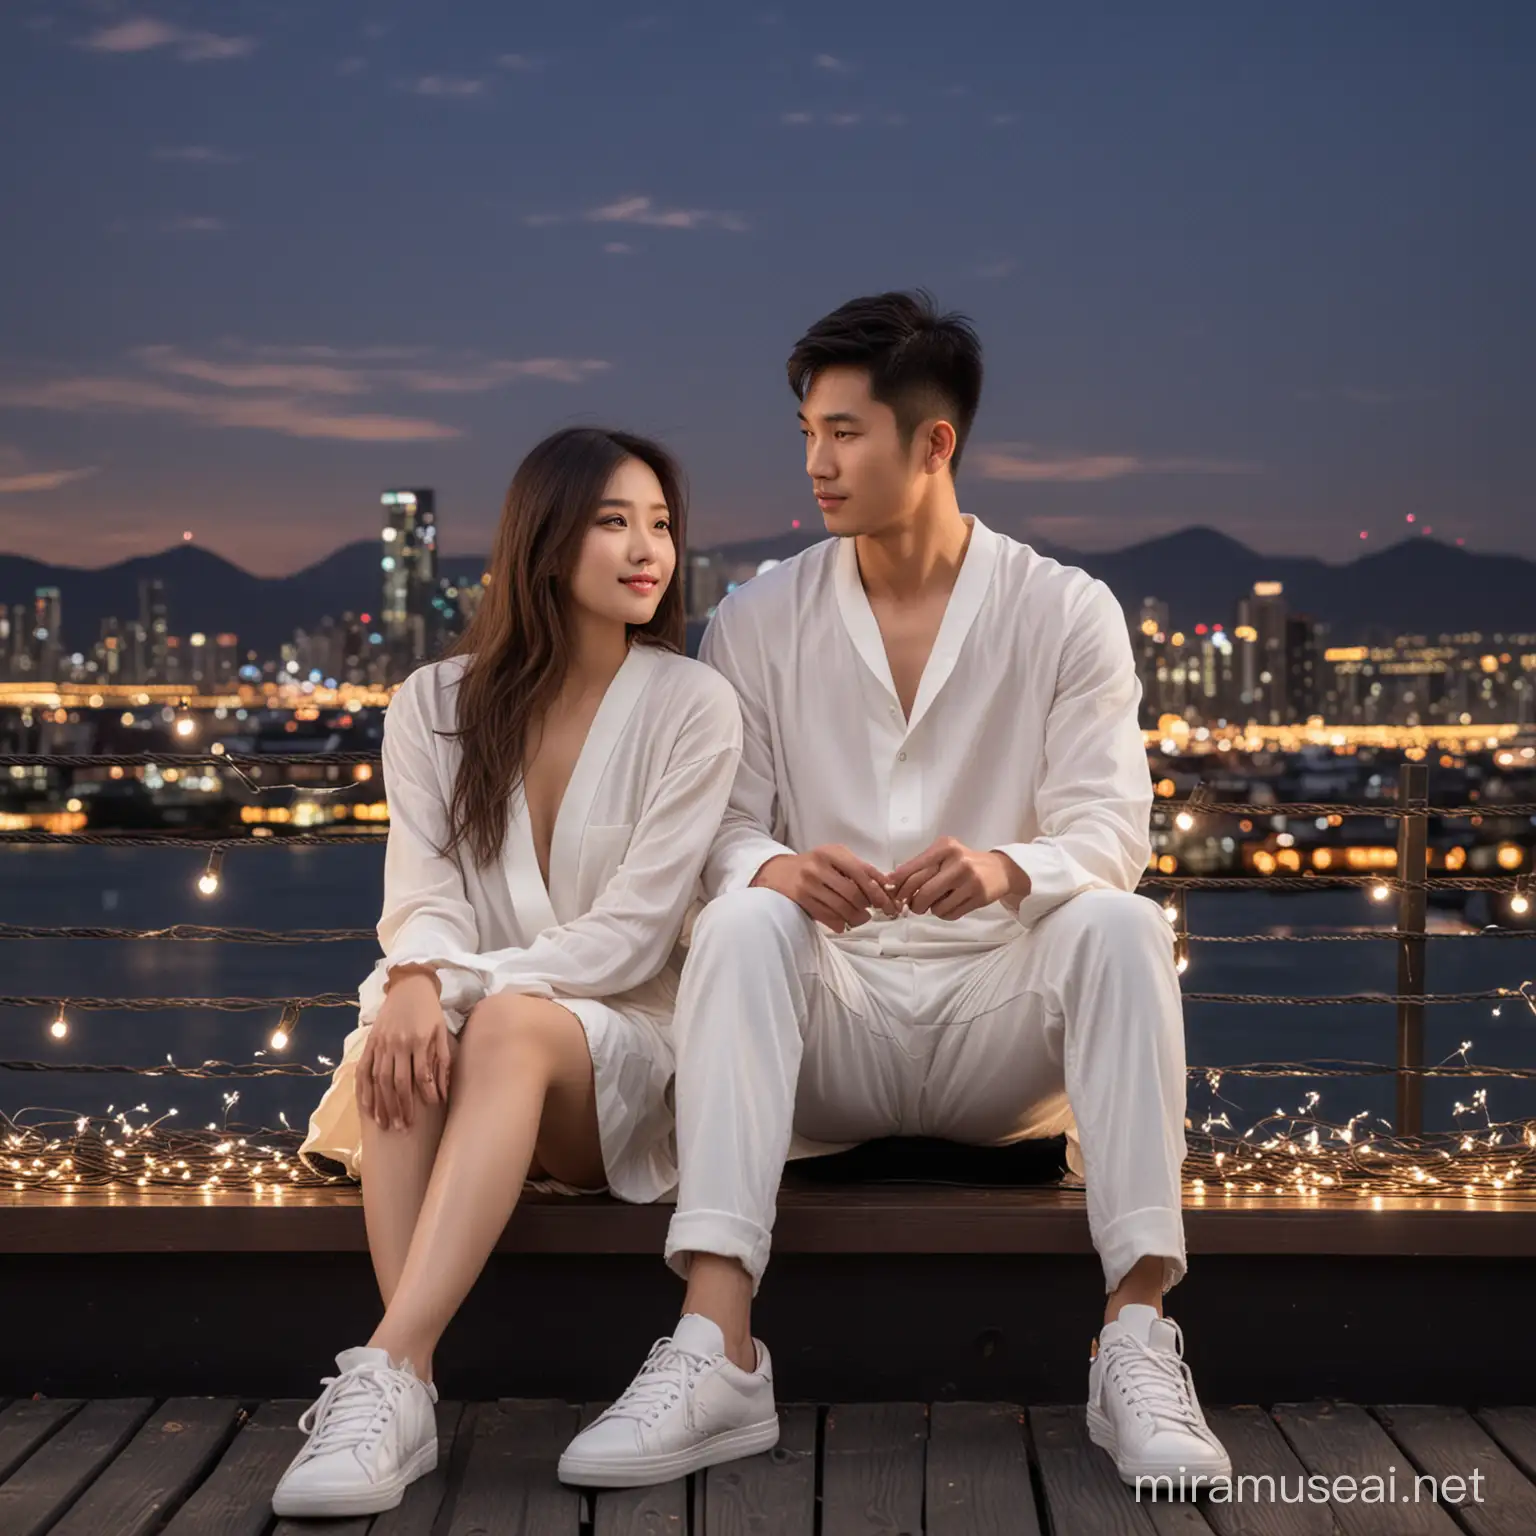 Asian Couple in White Sitting on Deck Sofa Under Twilight Sky